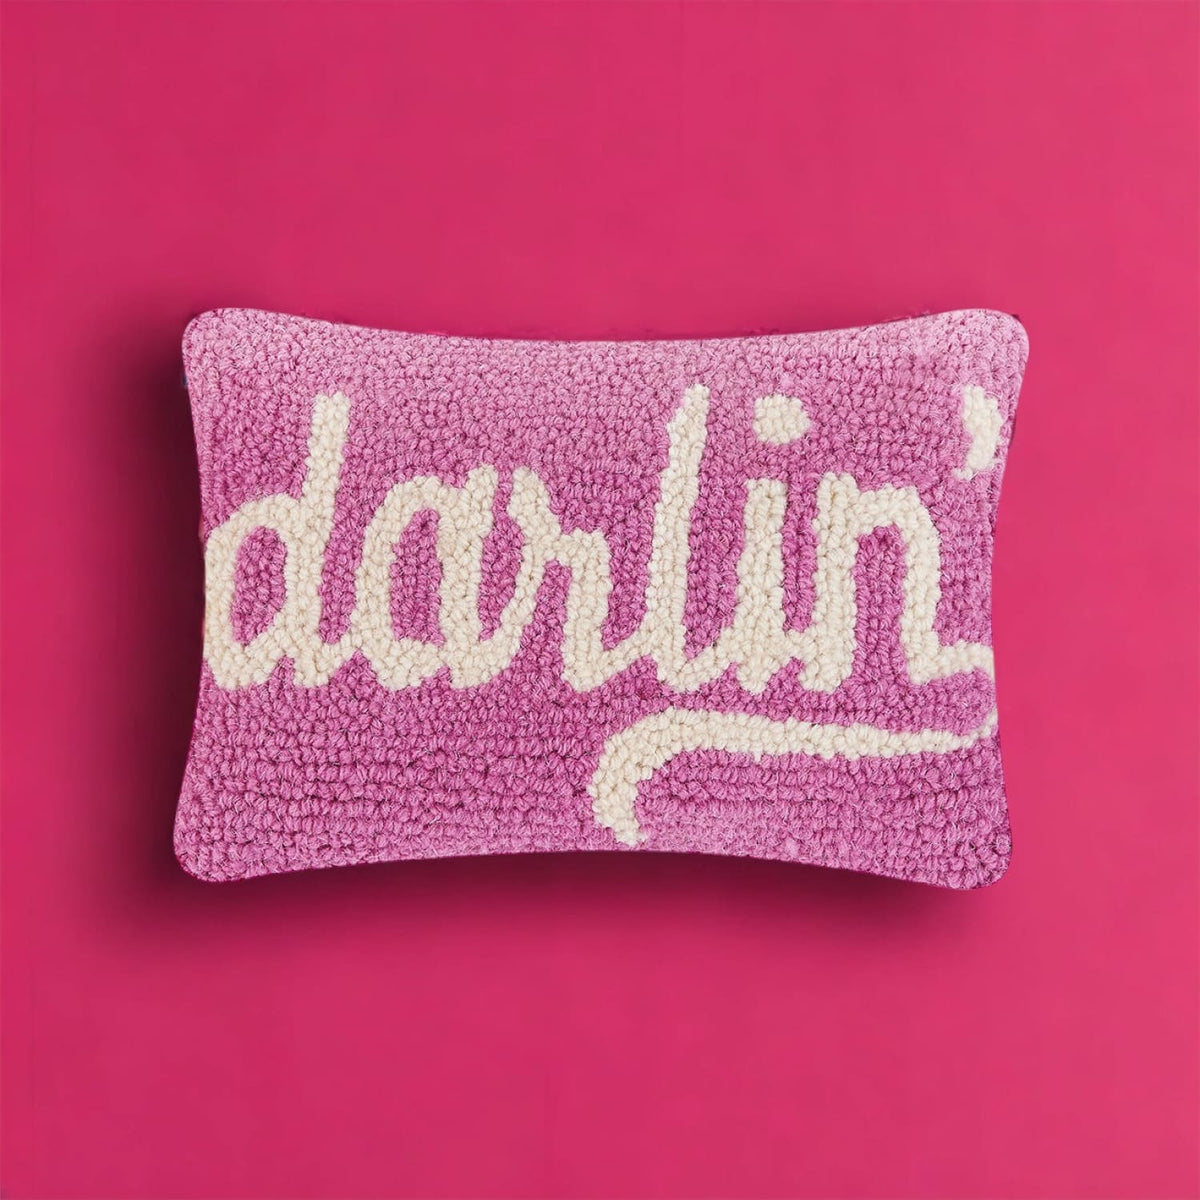 Darlin Hook Pillow 0323 - Aapiowned - Q123 - Womenowned